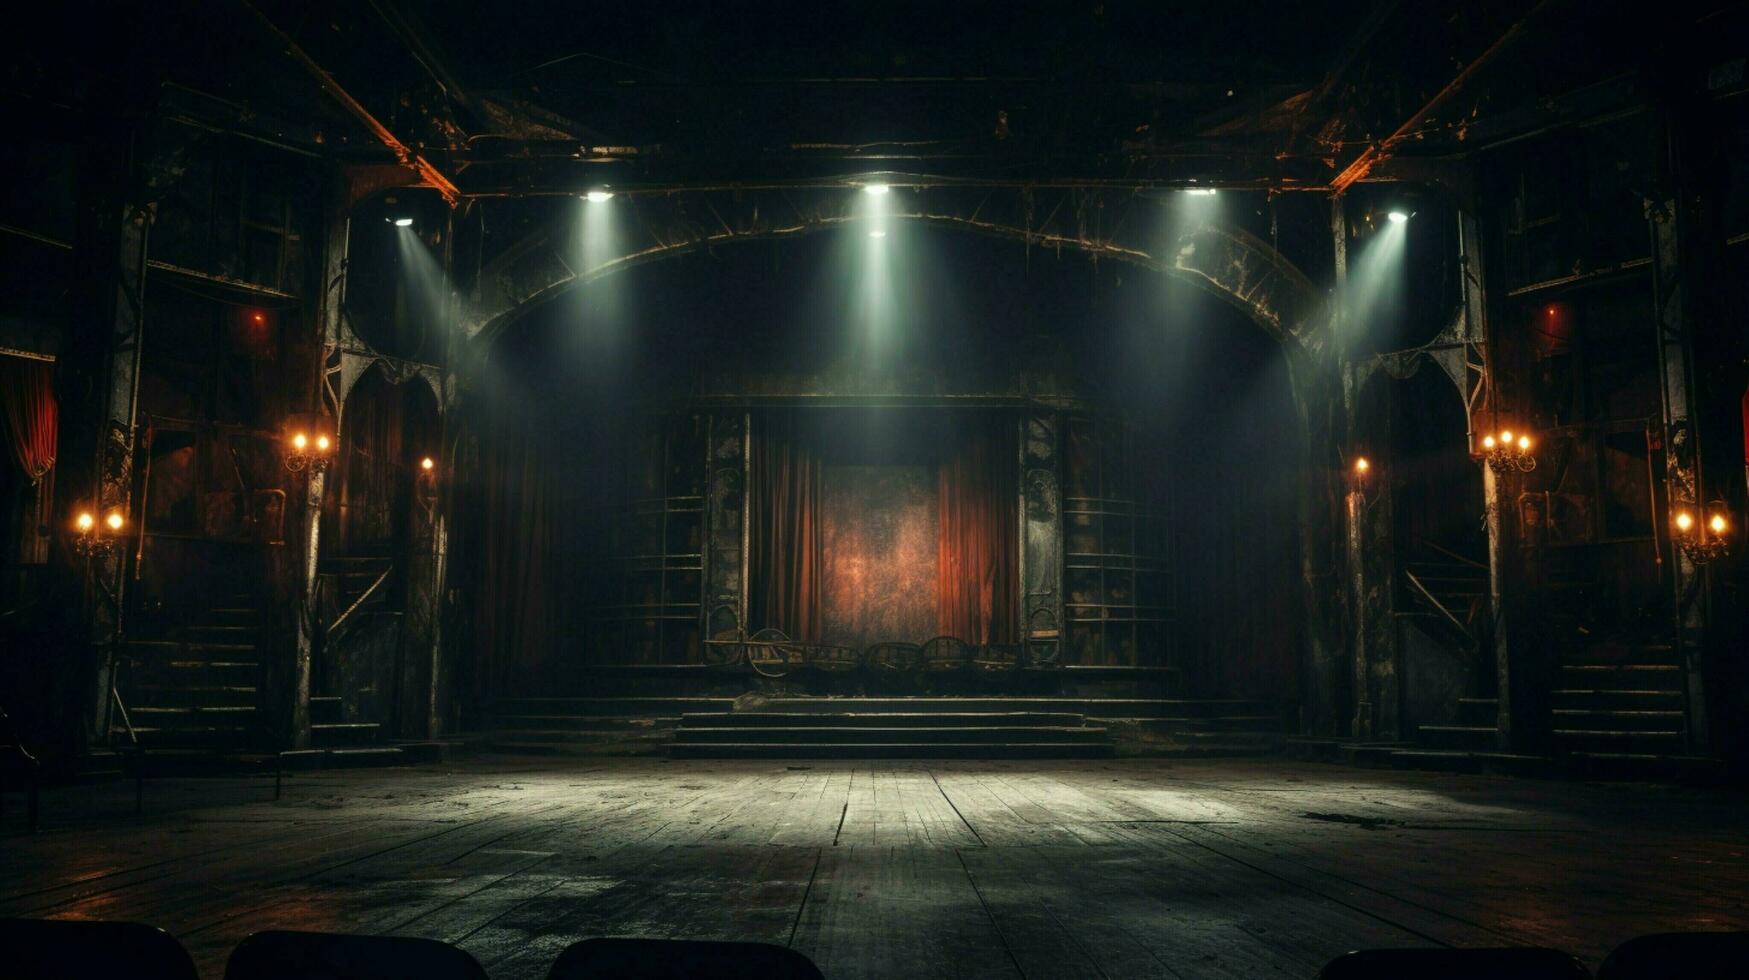 dark stage inside old theater illuminated by equipment photo